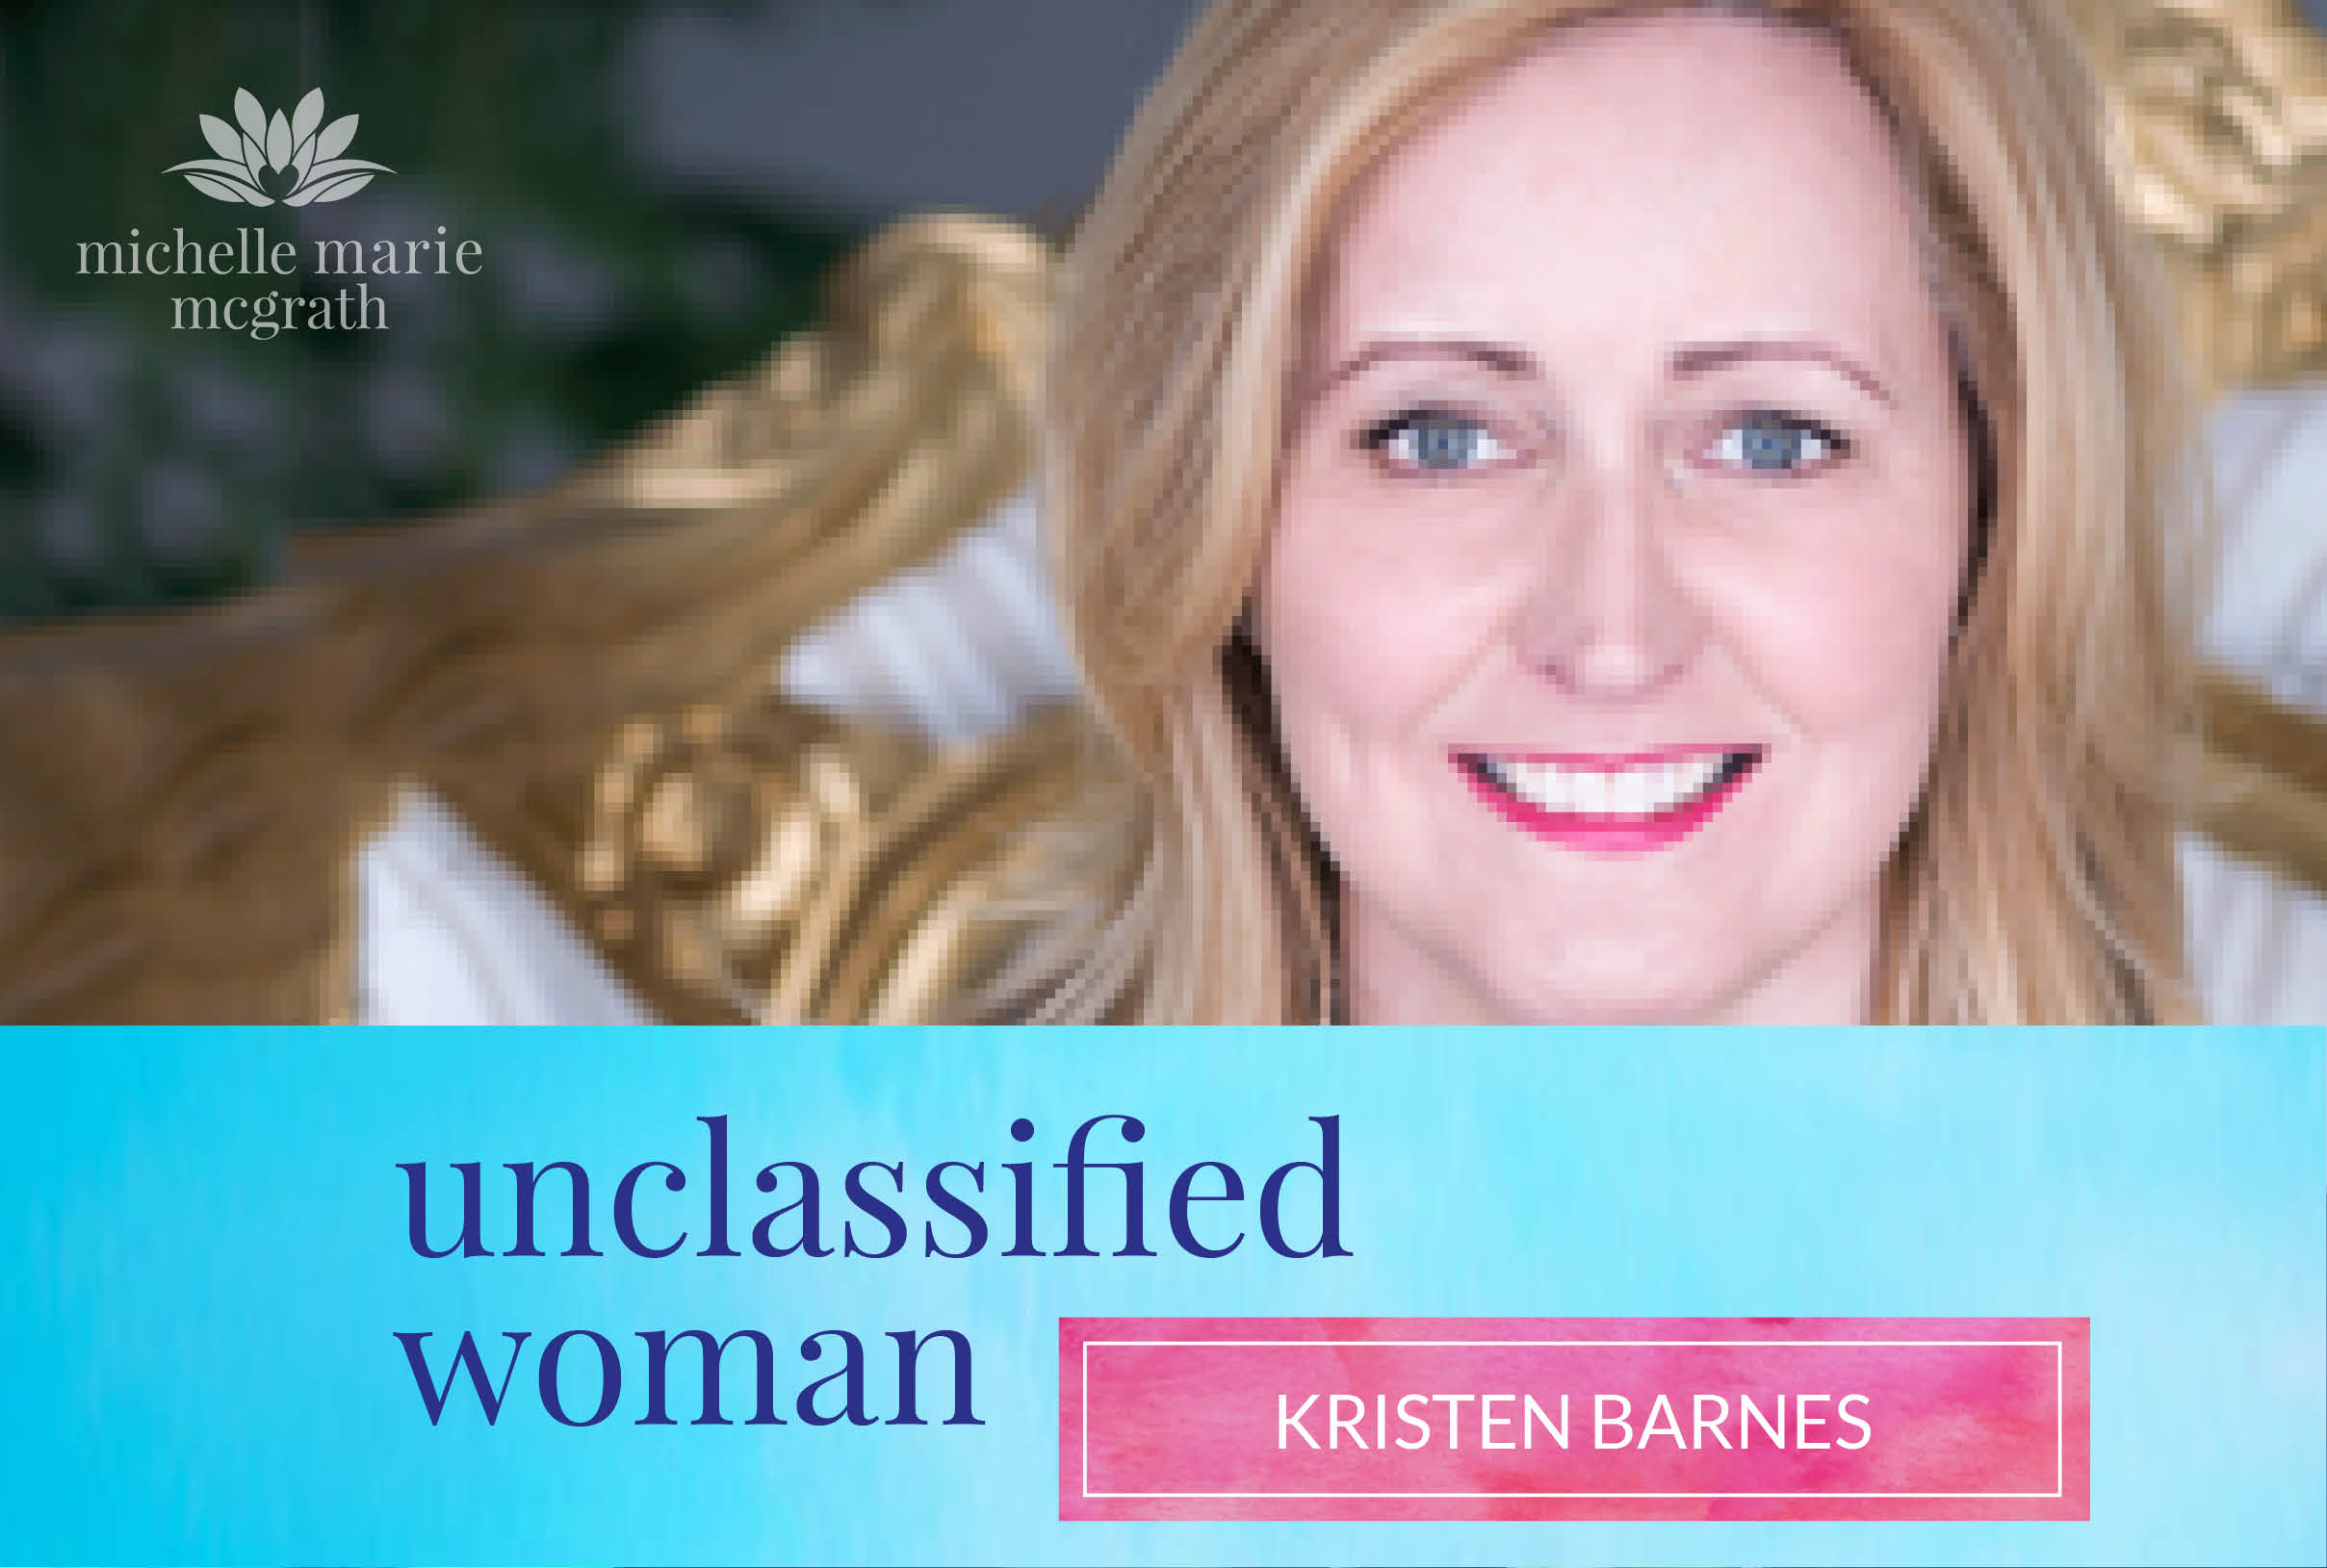 41: Many opportunities for mothering with Kristen Barnes